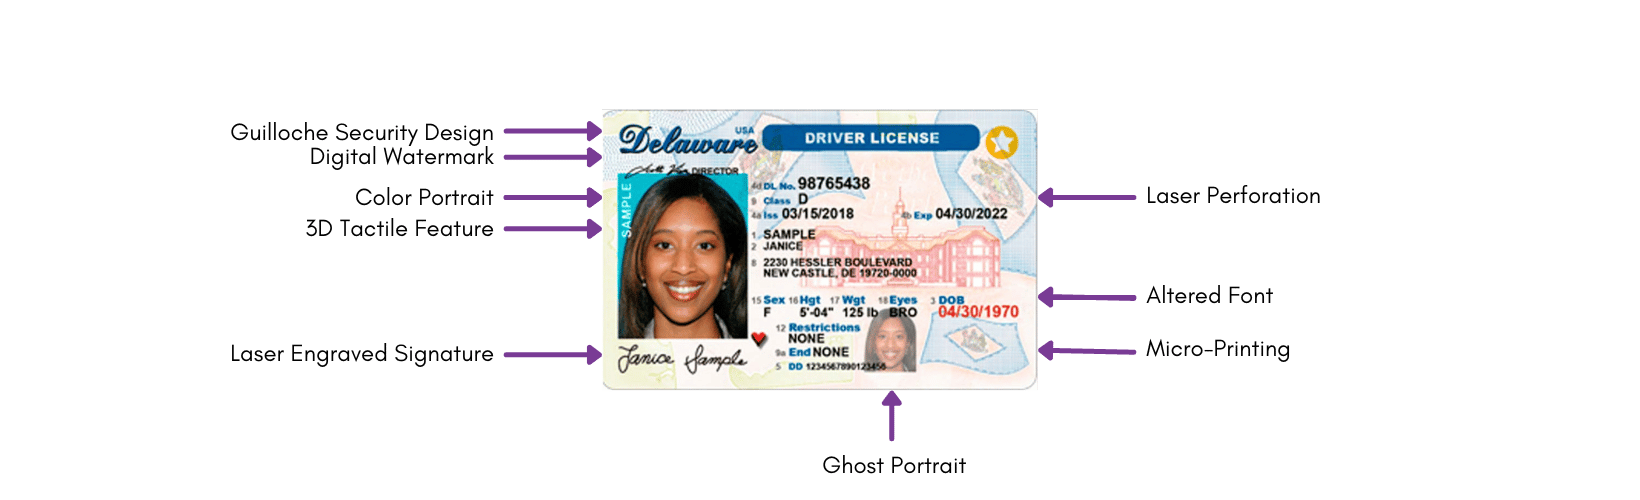 License Security Features Graphic